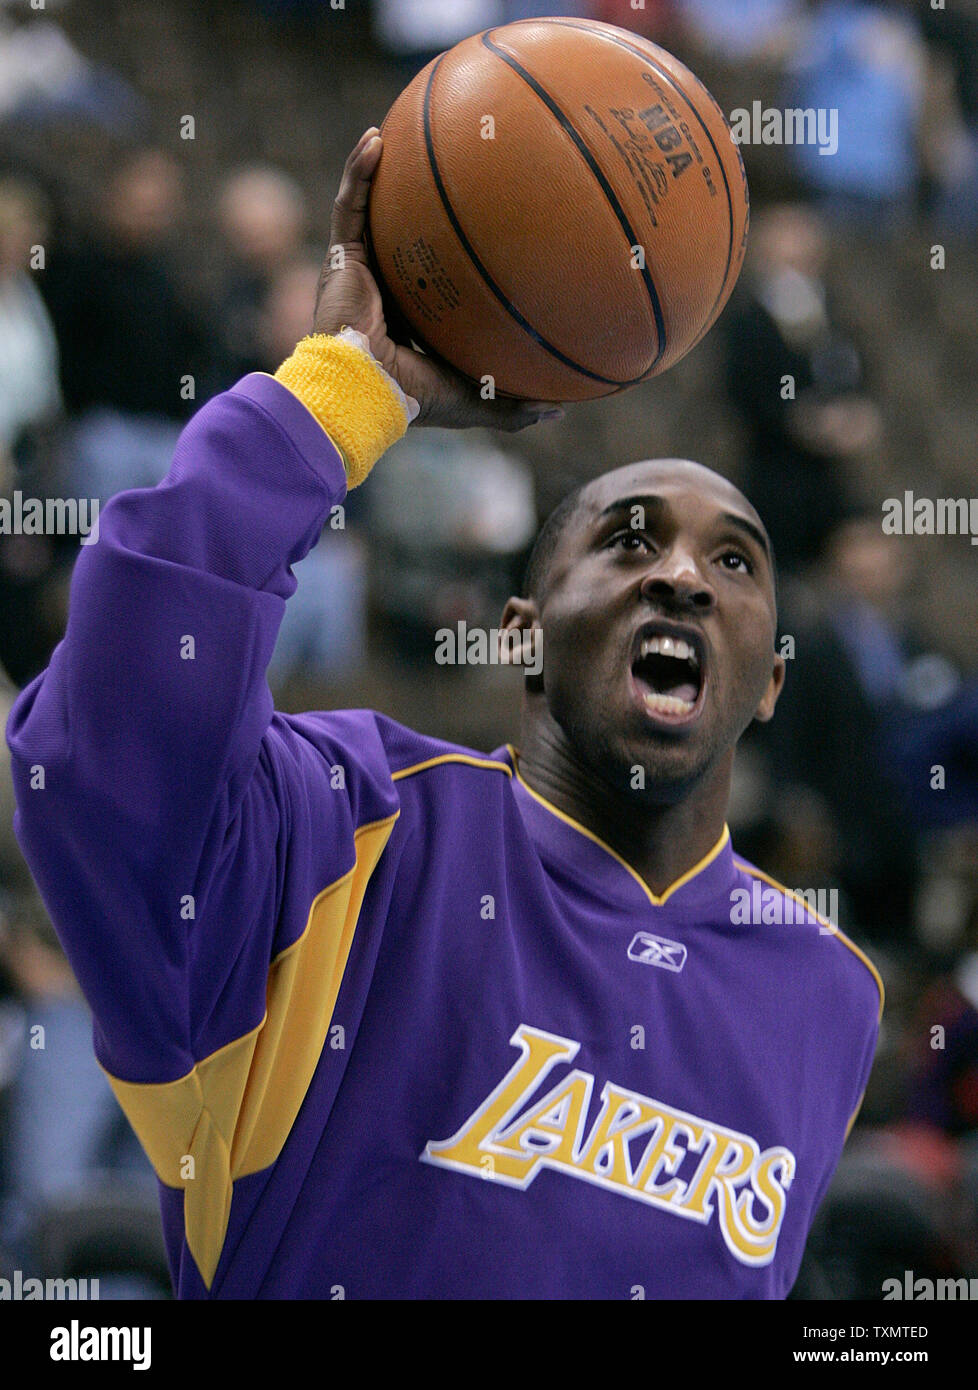 Los Angeles Lakers Kobe Bryant eyes the basket during warmups prior to opening the NBA season against the Denver Nuggets at the Pepsi Center in Denver November 2, 2005.  (UPI Photo/Gary C. Caskey) Stock Photo